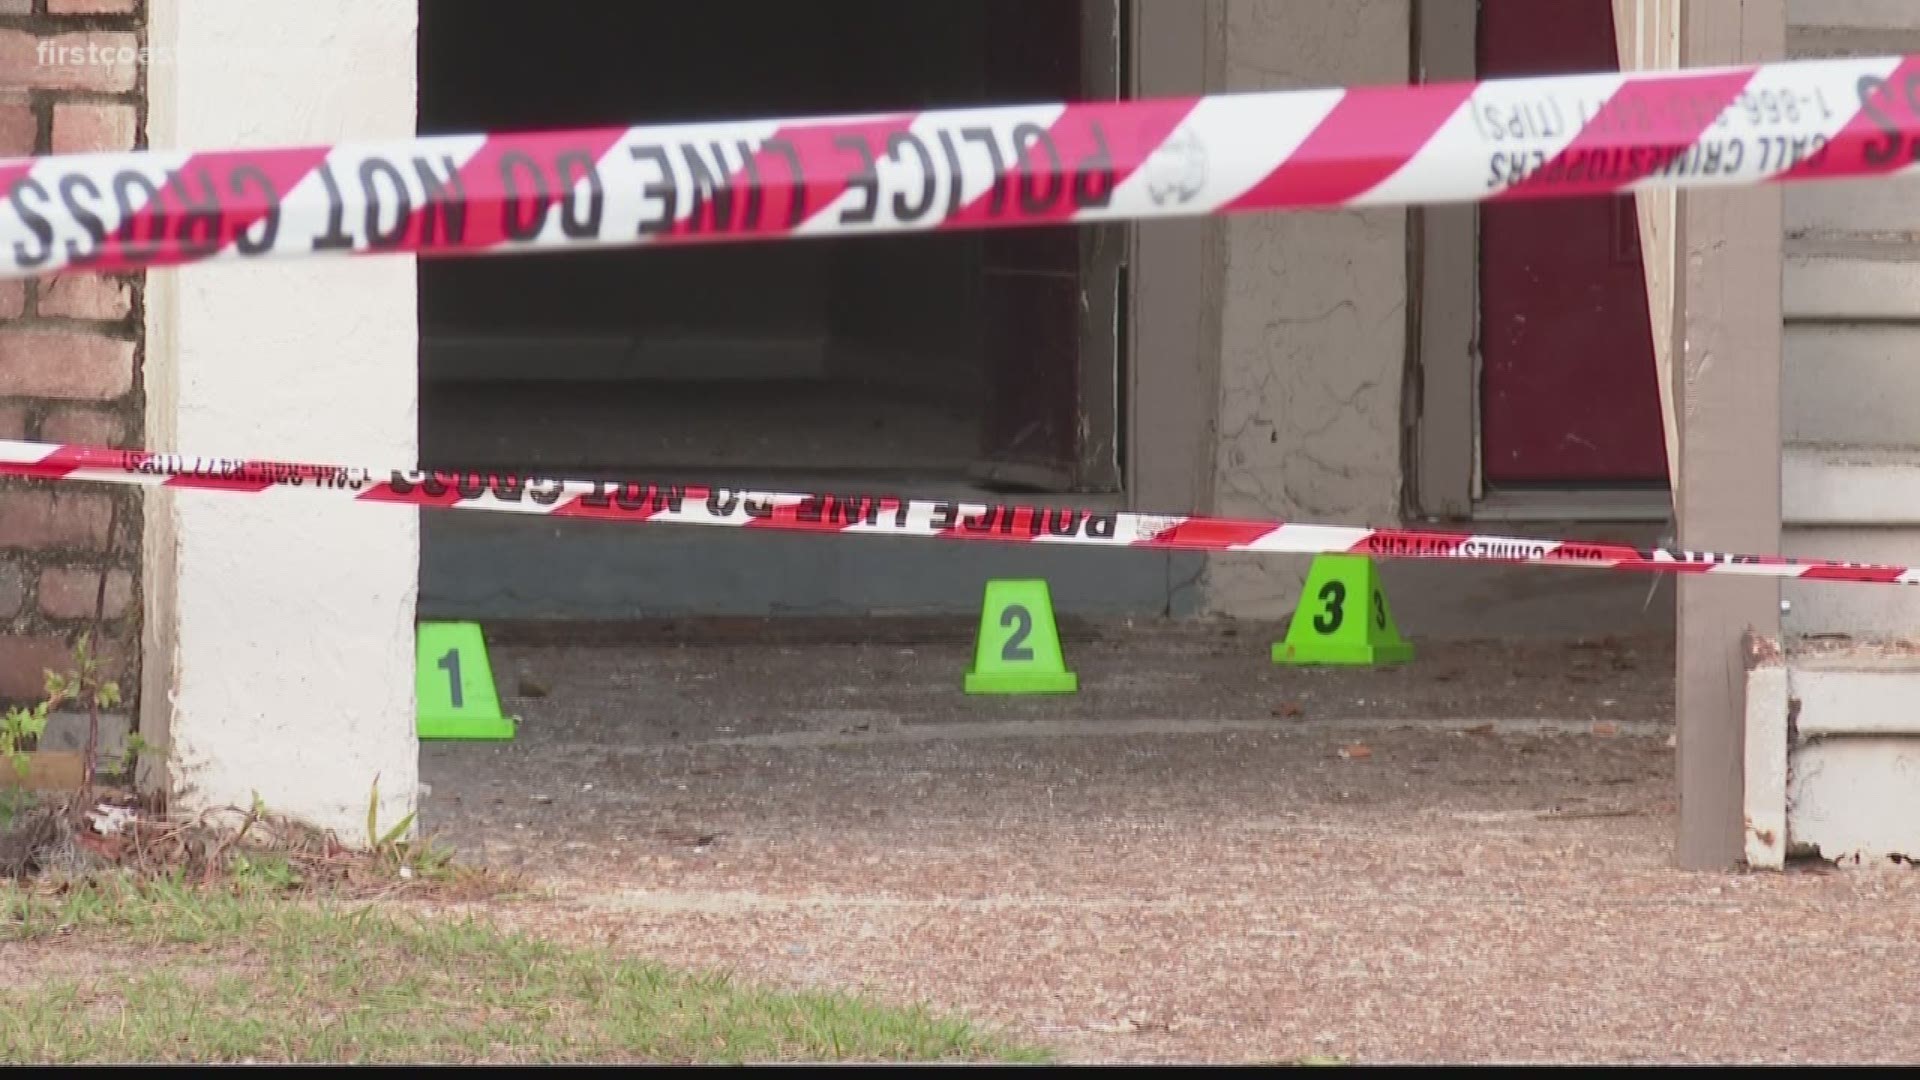 A man is recovering in the hospital after being shot in the leg, at an apartment complex on the Westside, according to the Jacksonville Sheriff's Office.